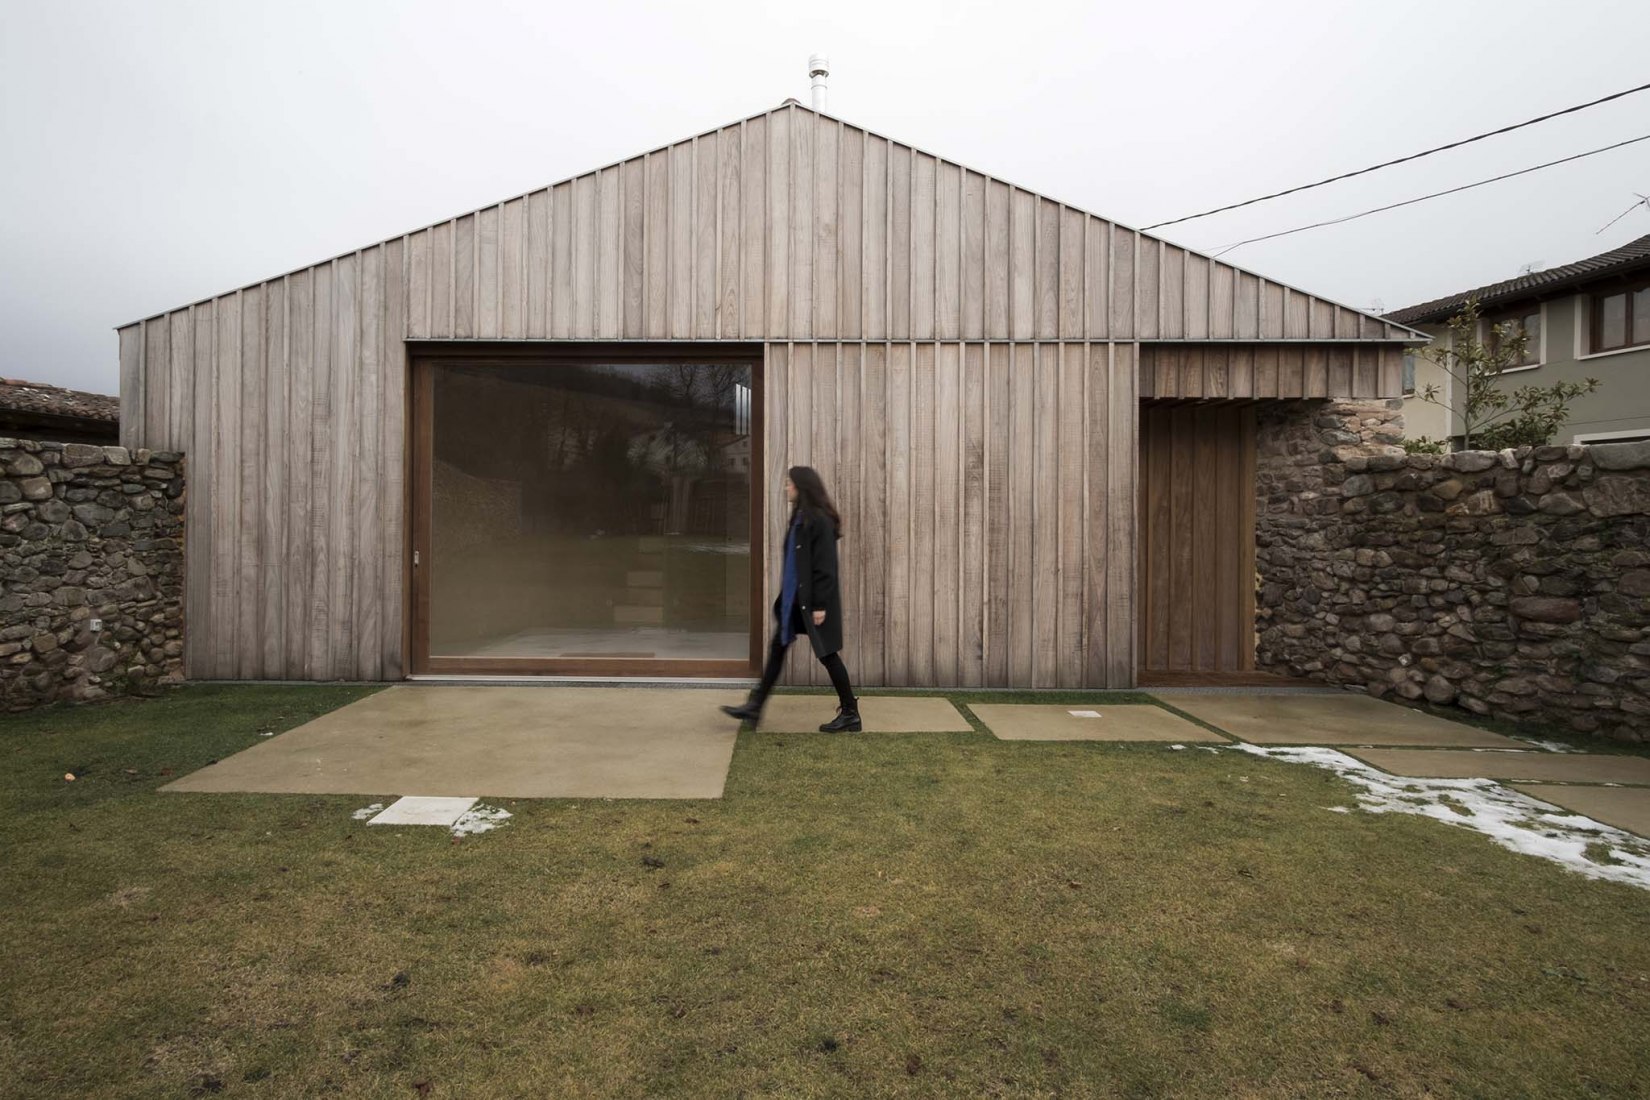 Transformation of an old tool warehouse into a rural house by MAAV. Photograph by Guillermo Avanzini Alcibar 